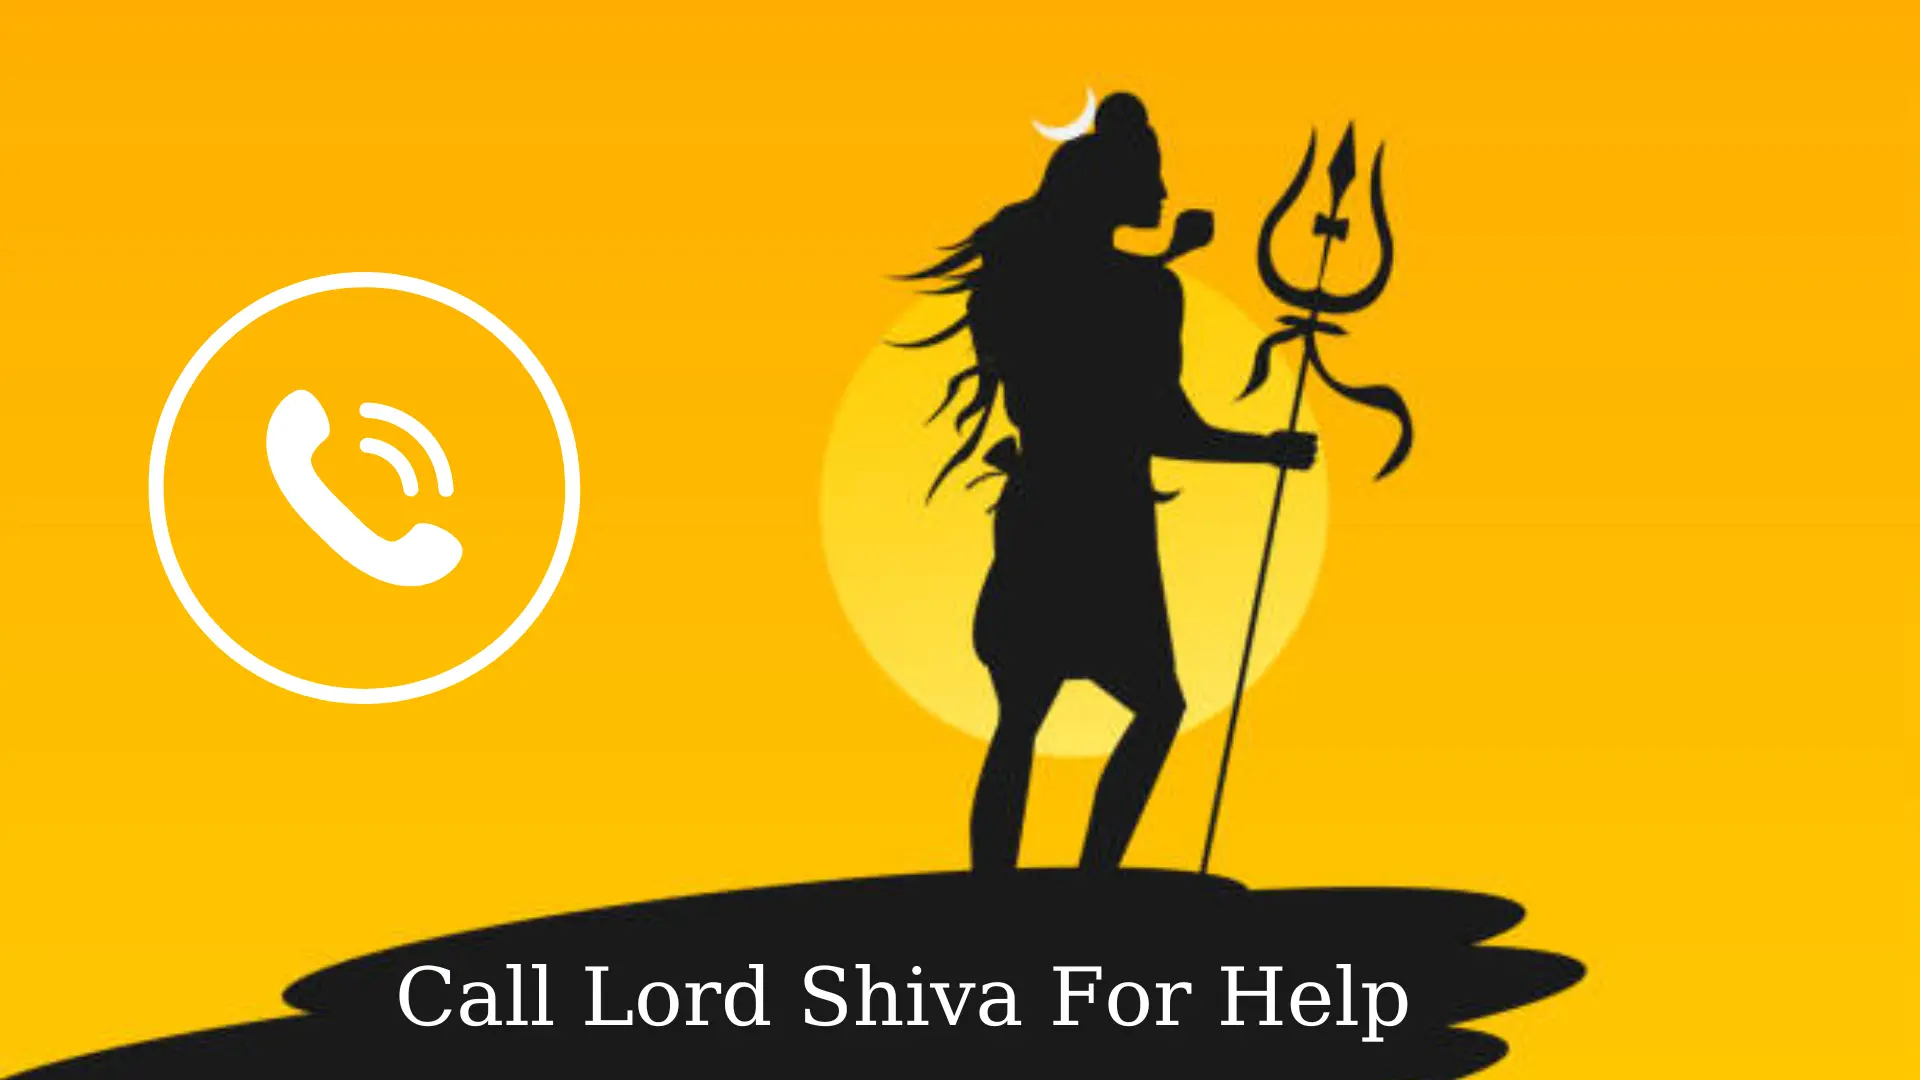 Call Lord Shiva For Help